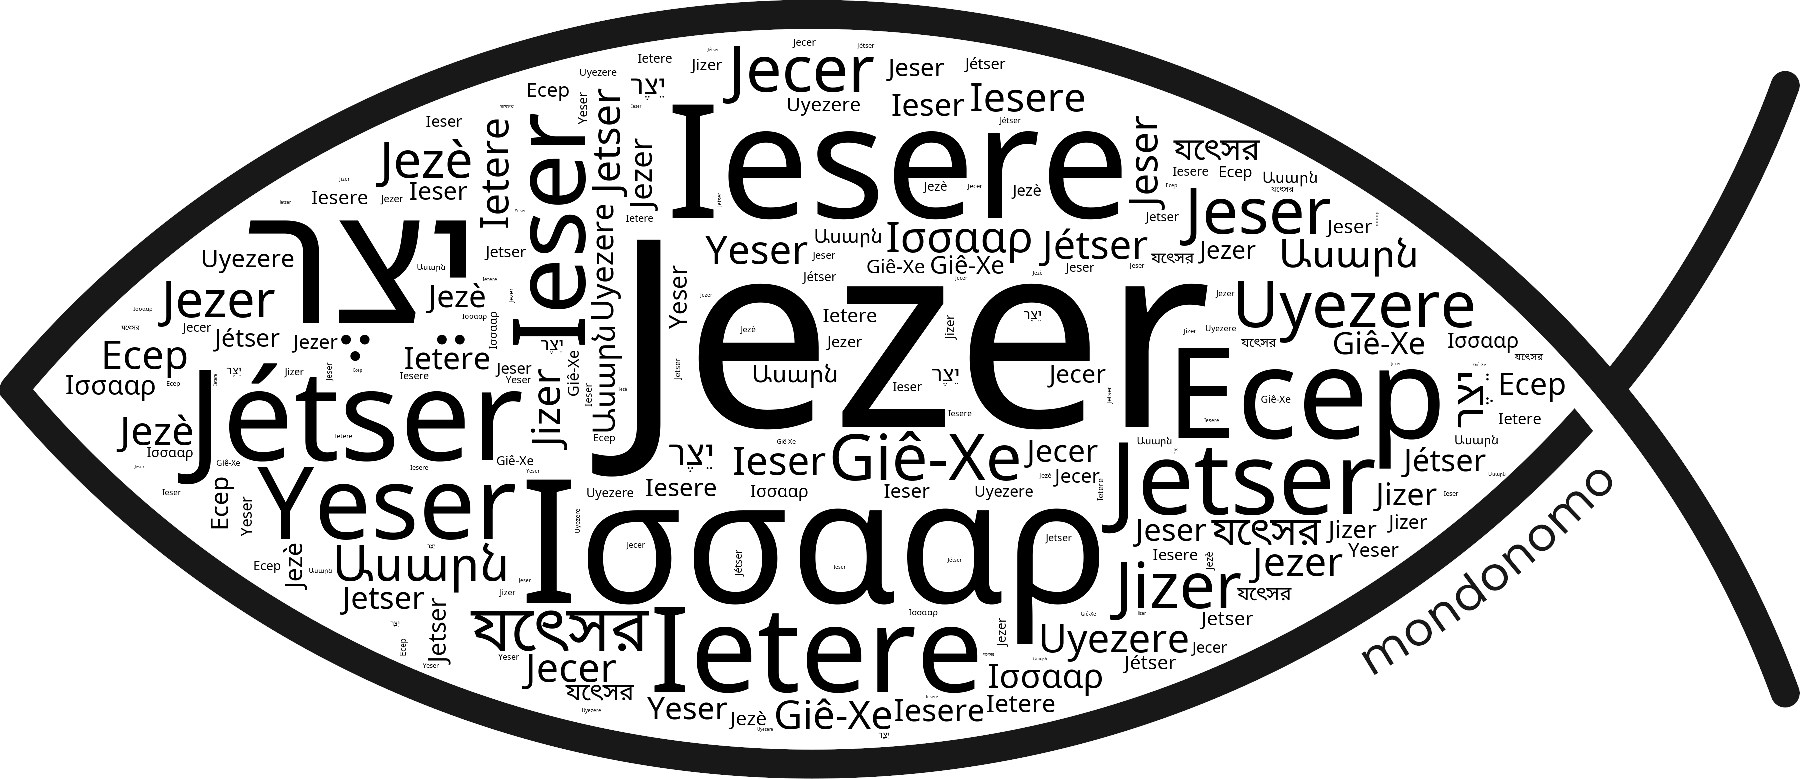 Name Jezer in the world's Bibles